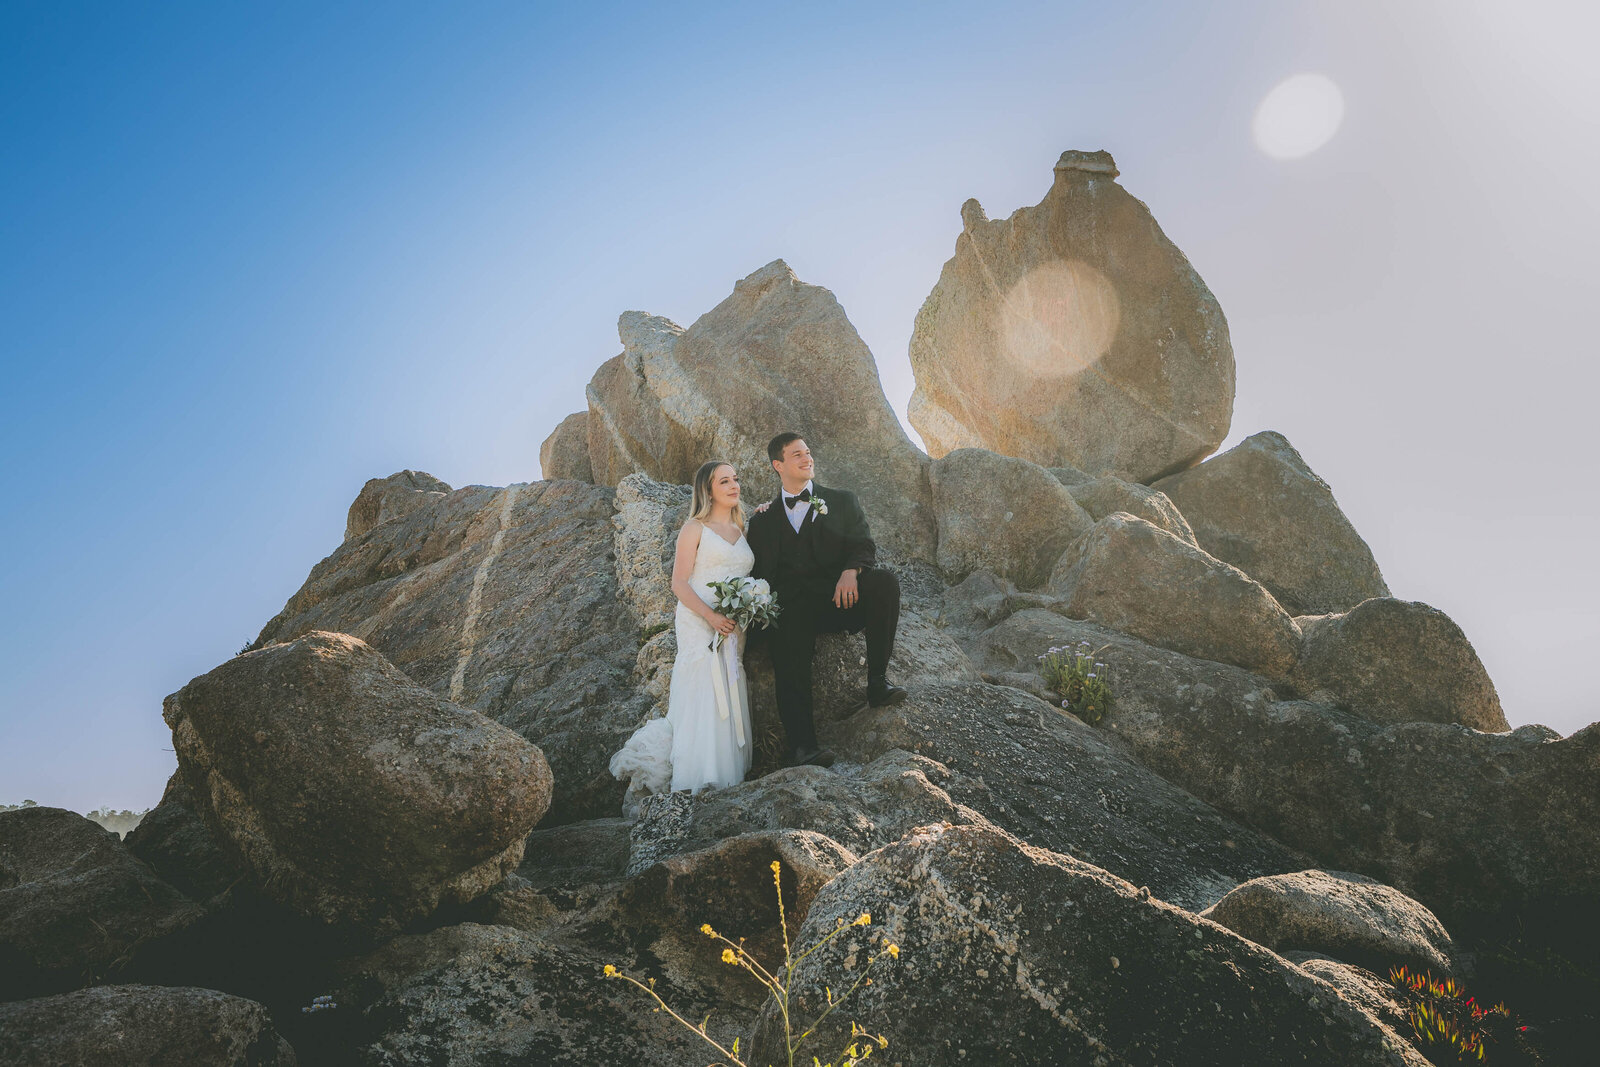 A bride and groom pose on rocks and look towards the right of the frame as a sun flare appears.